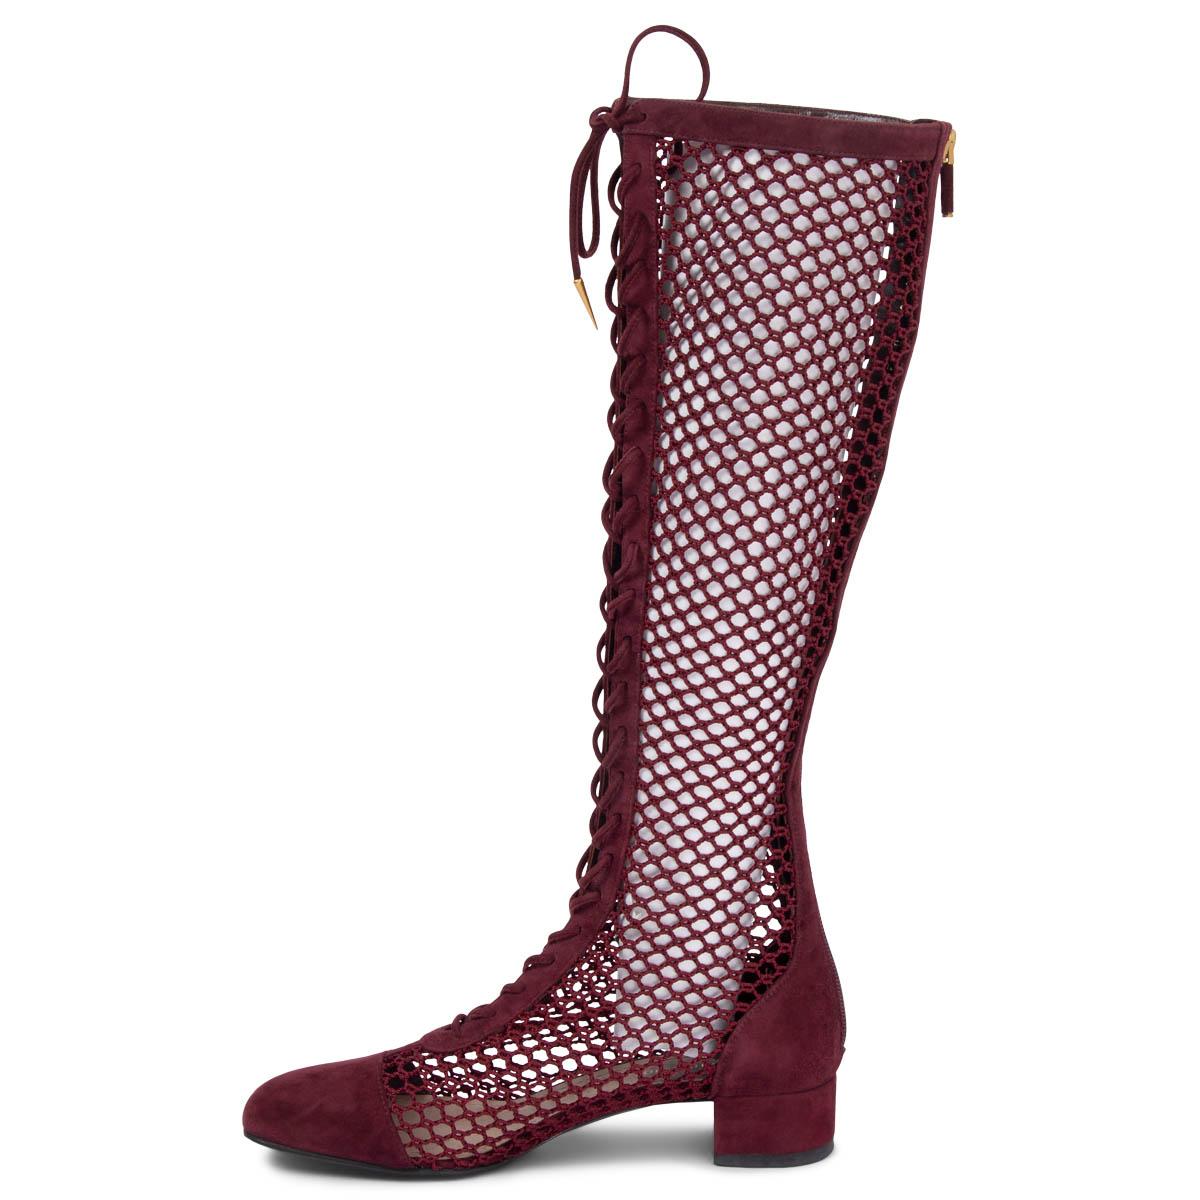 Women's CHRISTIAN DIOR burgundy suede 2018 NAUGHTILY-D FISHNET Boots Shoes 38.5